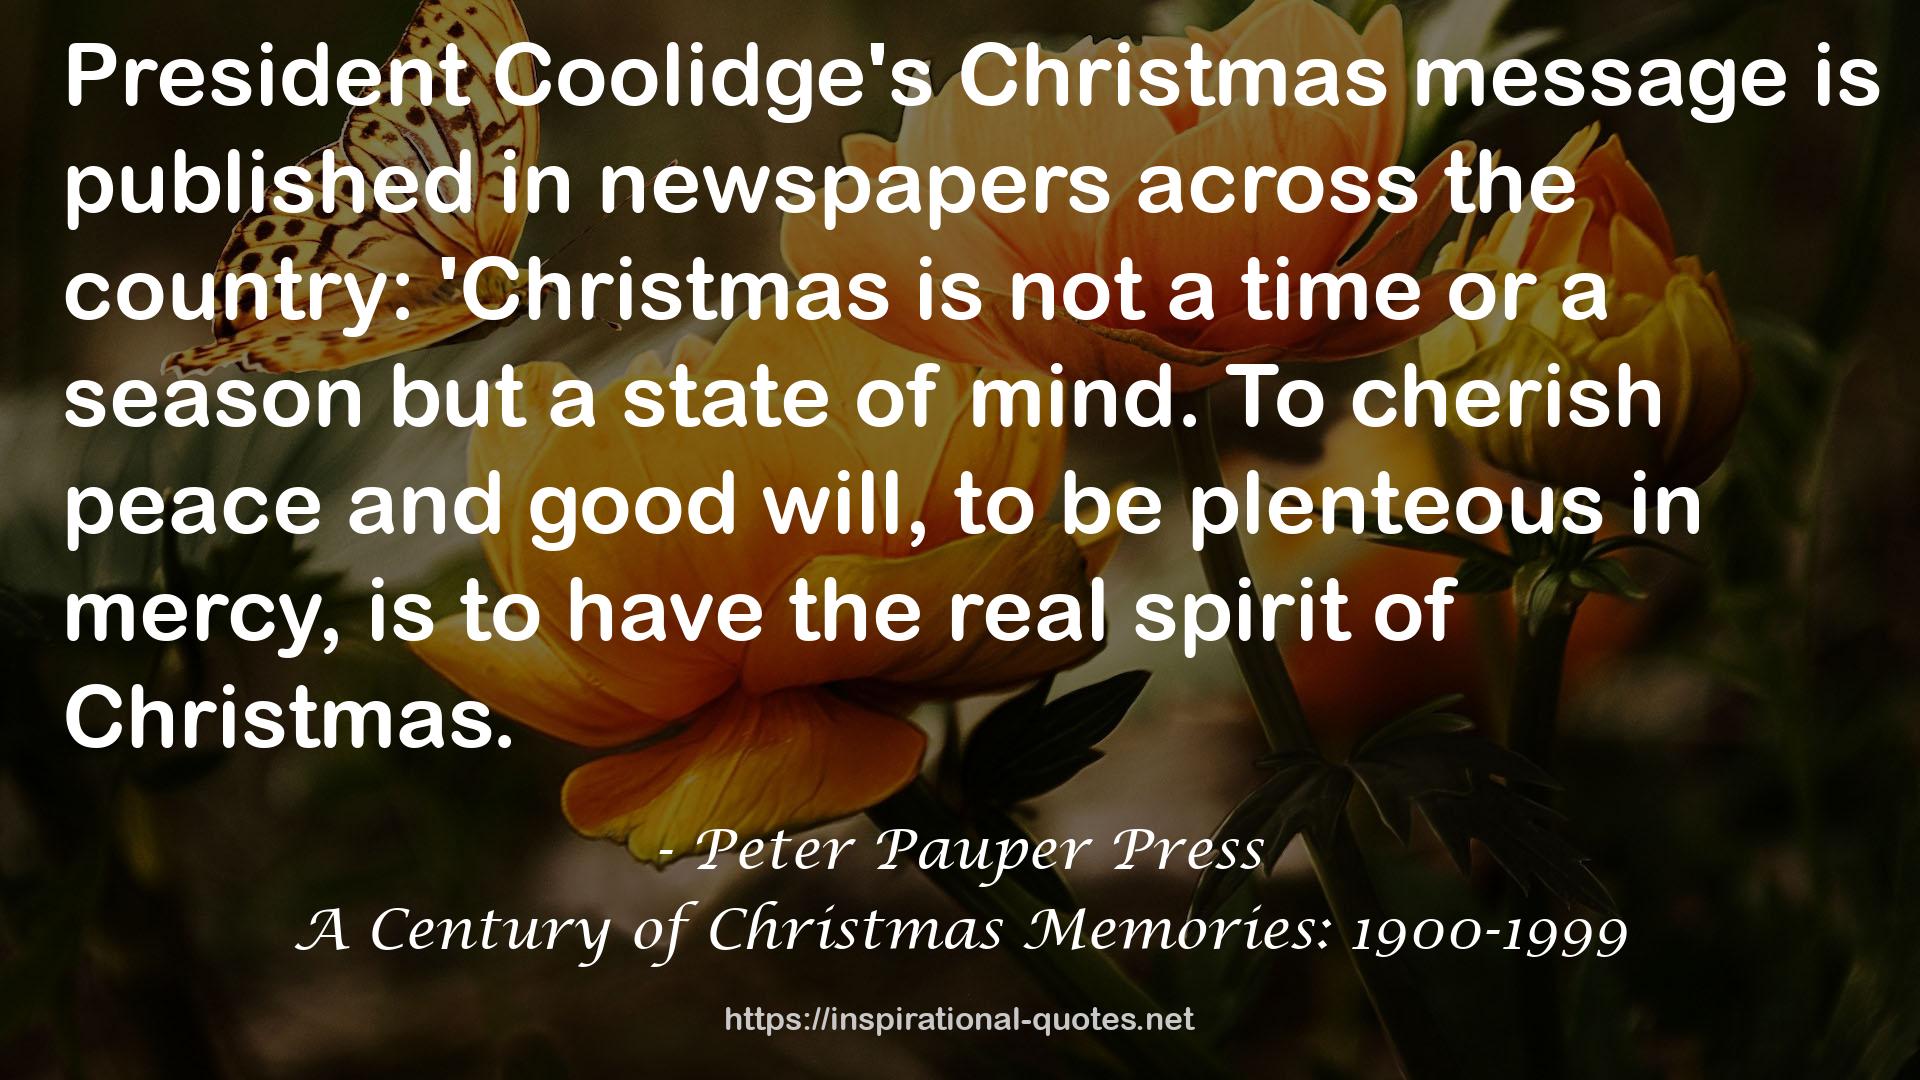 A Century of Christmas Memories: 1900-1999 QUOTES